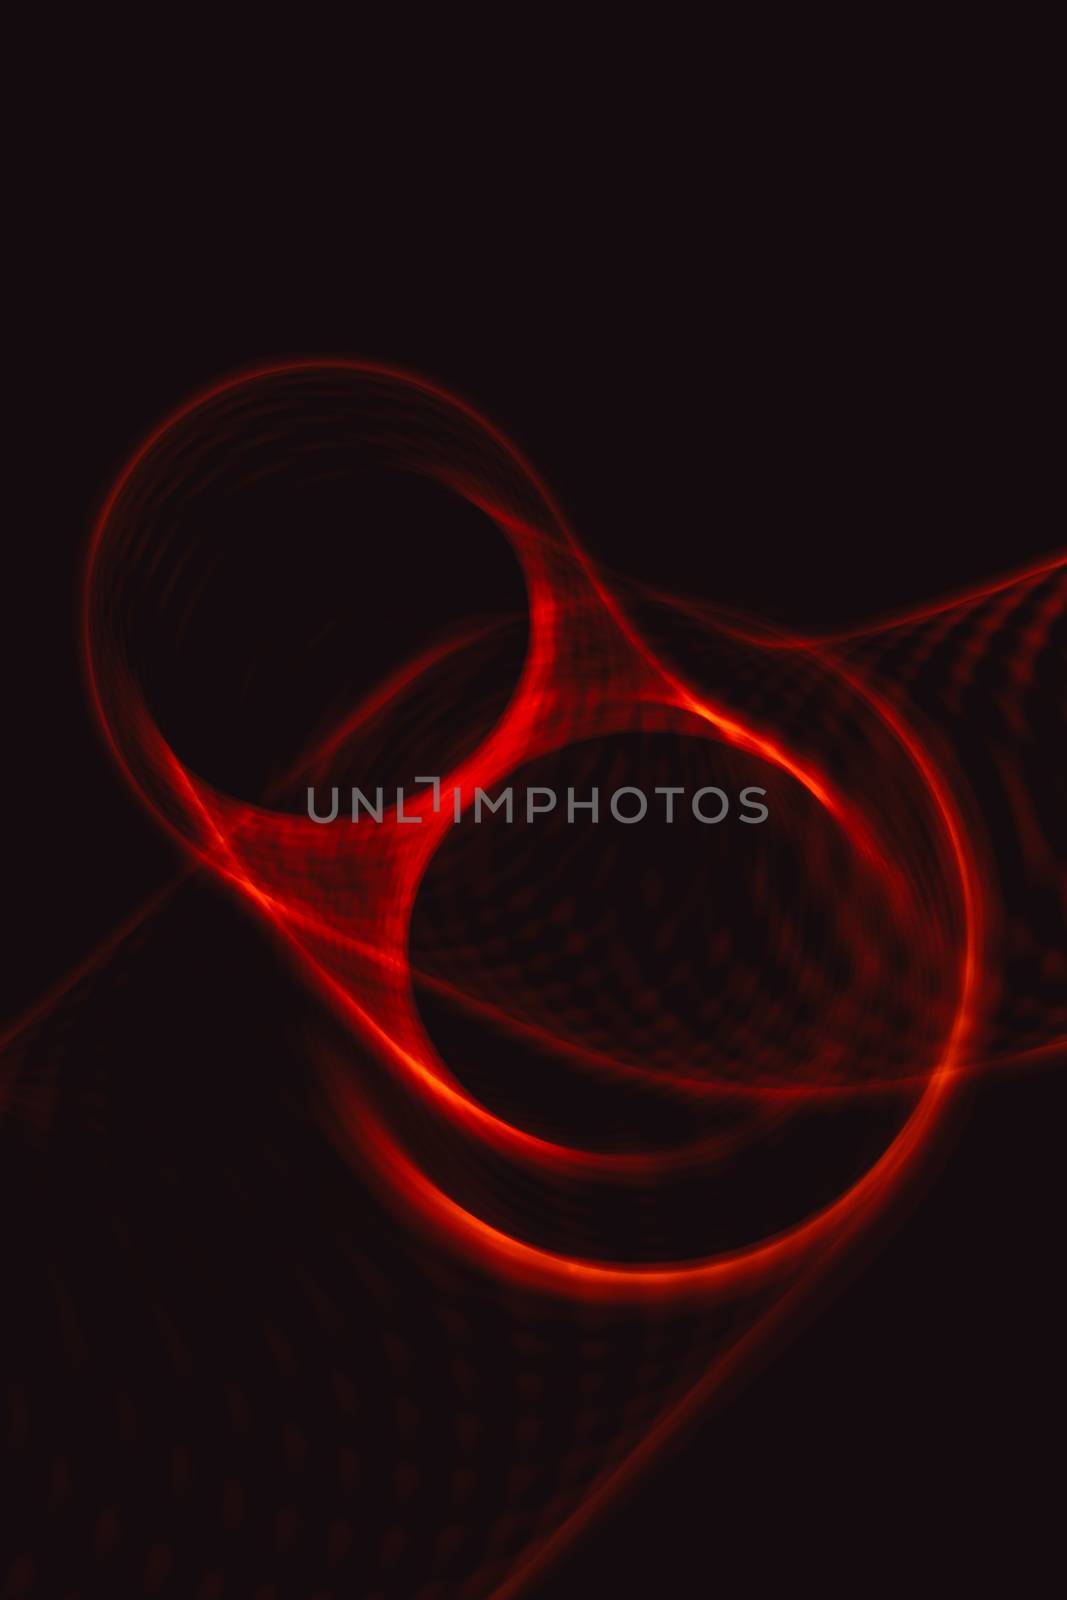 Sound waves in the visible red color in the dark